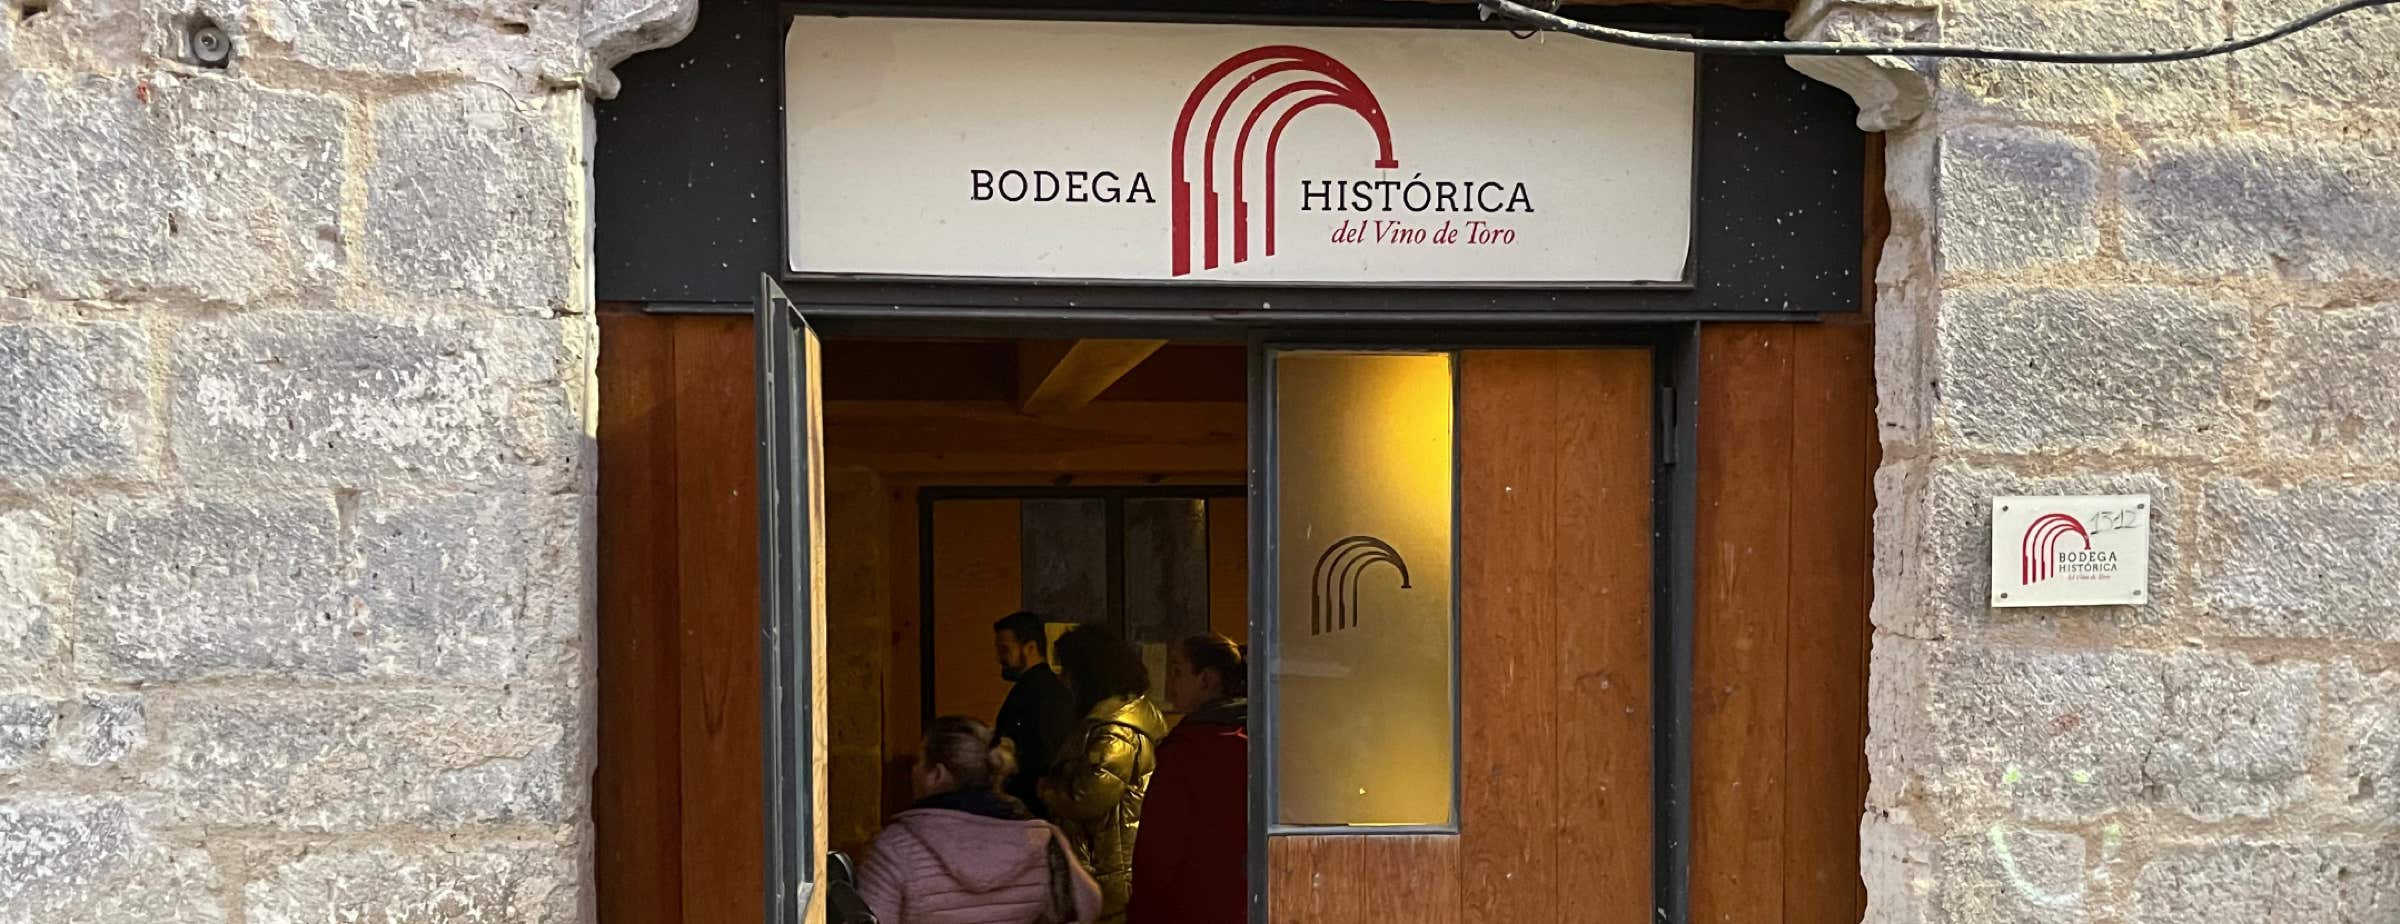 Picture of the entrance of the Bodega Histórica. The entrance is a wooden door. Over the entrance is a sign with “Bodega Histórica del Vino de Toro”. The door is open, and people can be seen inside. Next to the door, parts of the grey stone facade are visible.